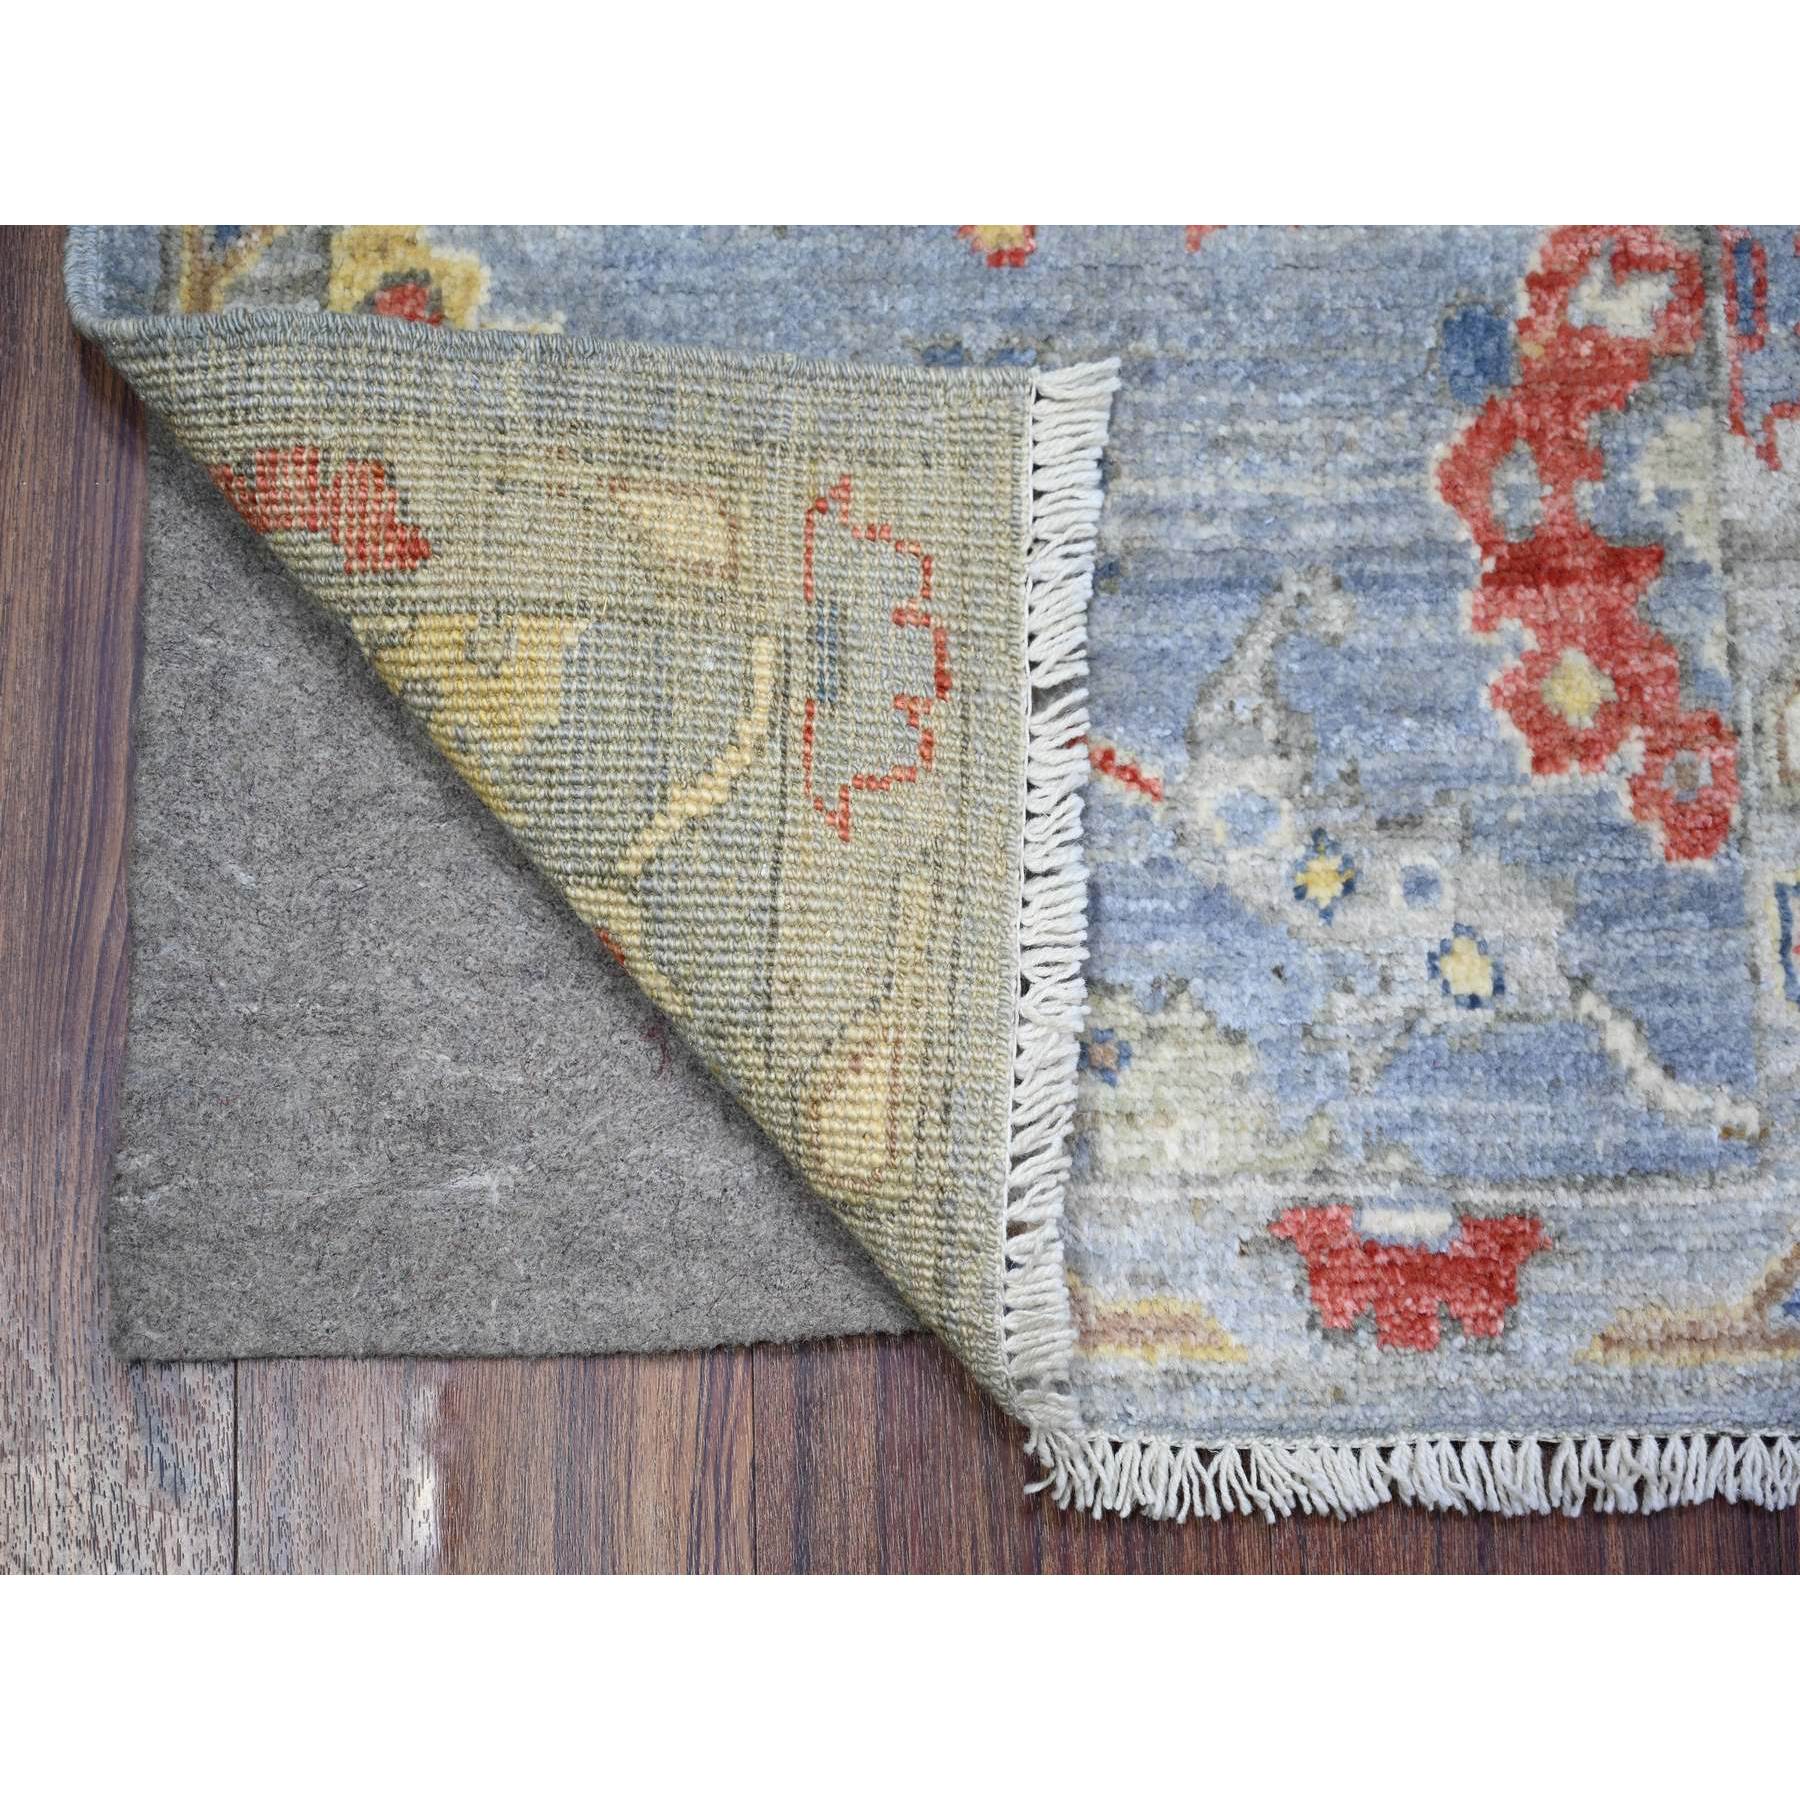 1'10"x3' Blue Gray, Natural Dyes Organic Wool, Hand Woven Afghan Angora Oushak with Pop of Color, Mat Oriental Rug 